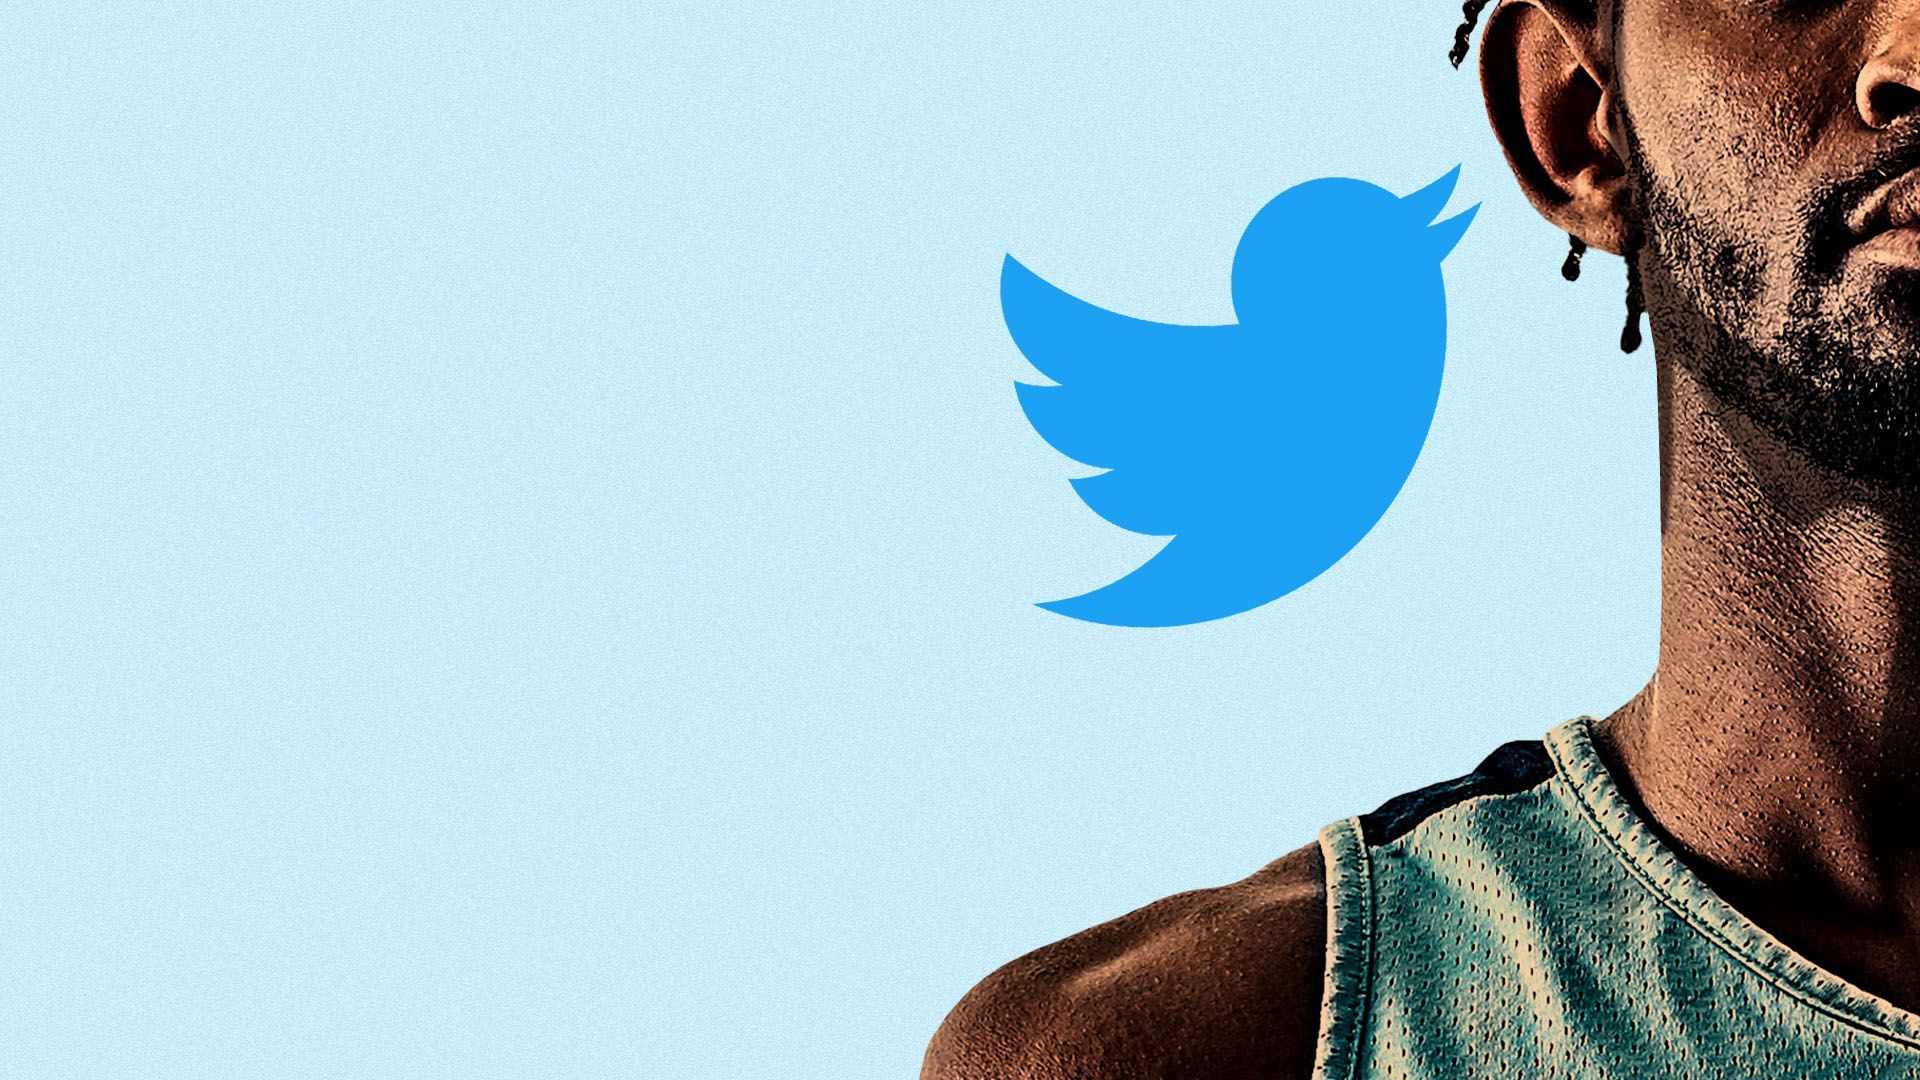 Illustration of the twitter logo speaking in the ear of a basketball player